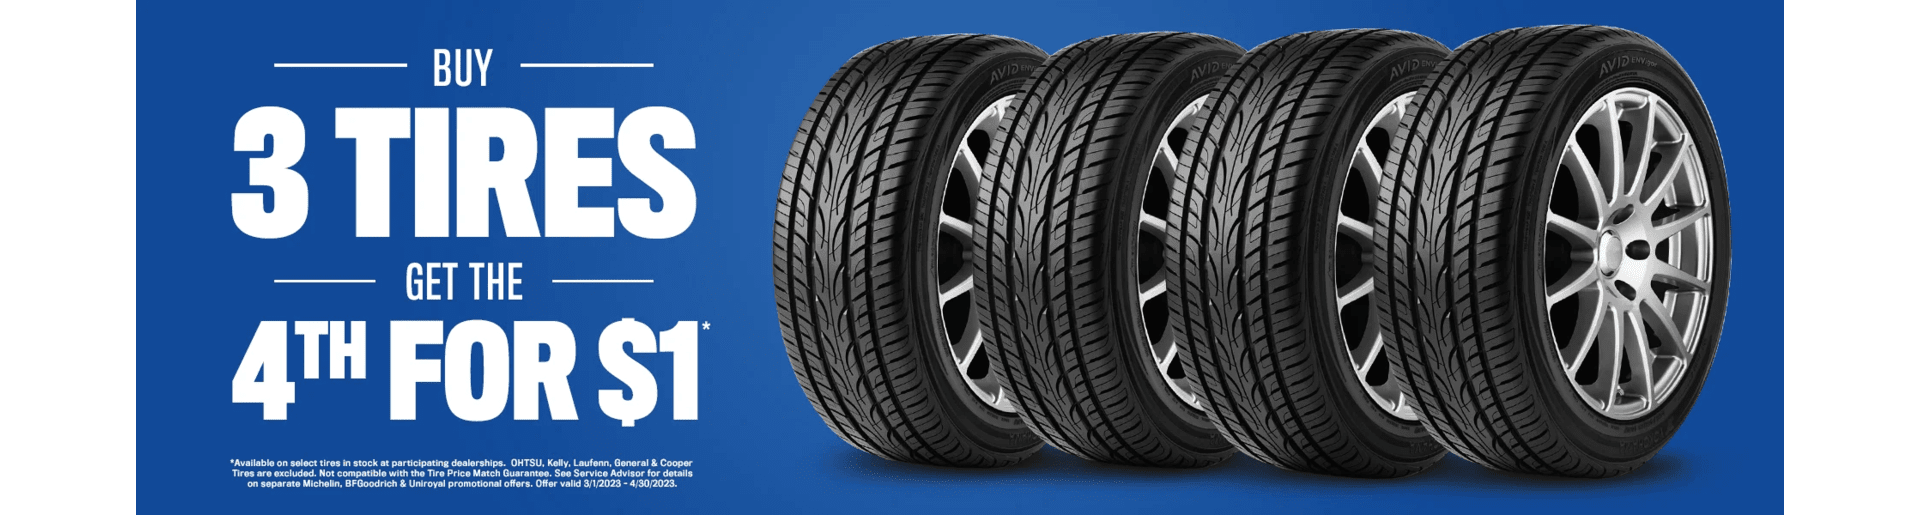 Buy 3 get one free Tires